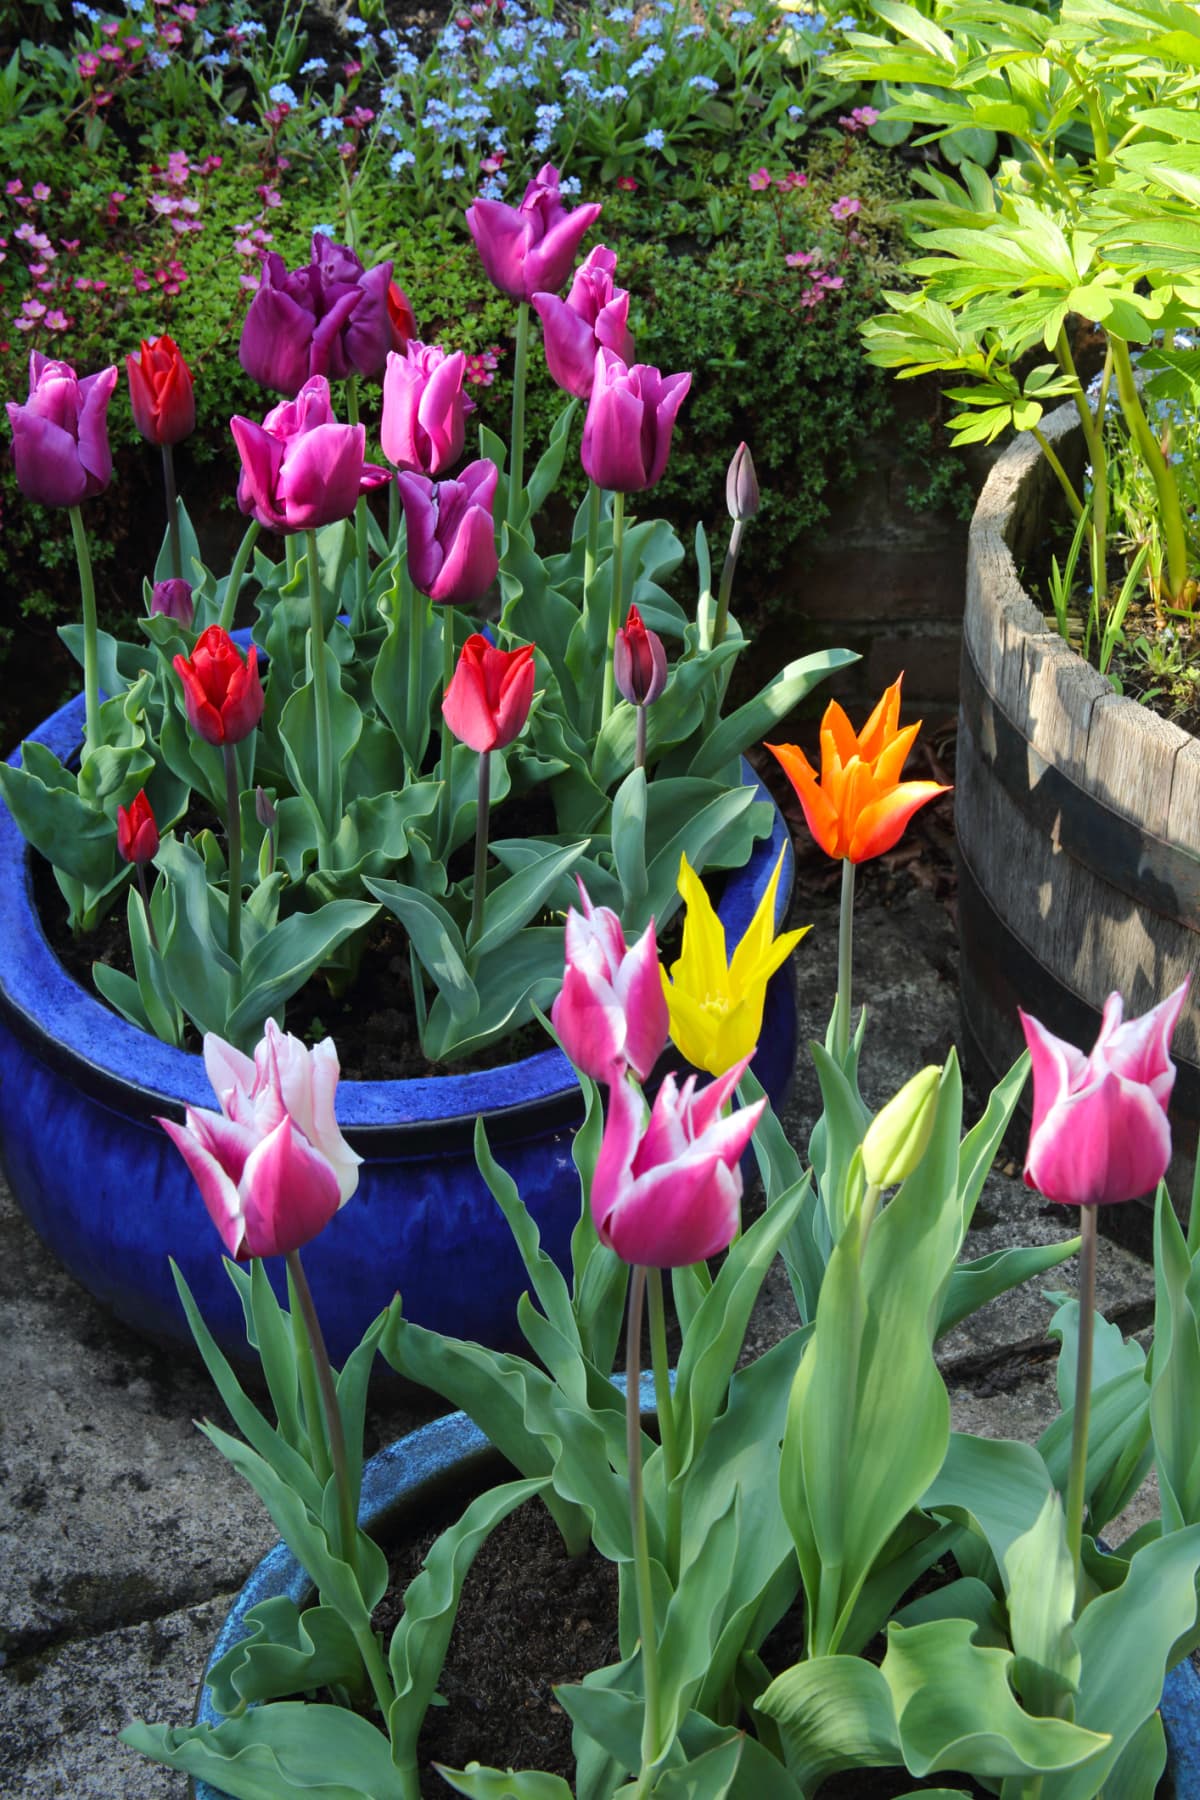 Colorful, potted tulips in a garden